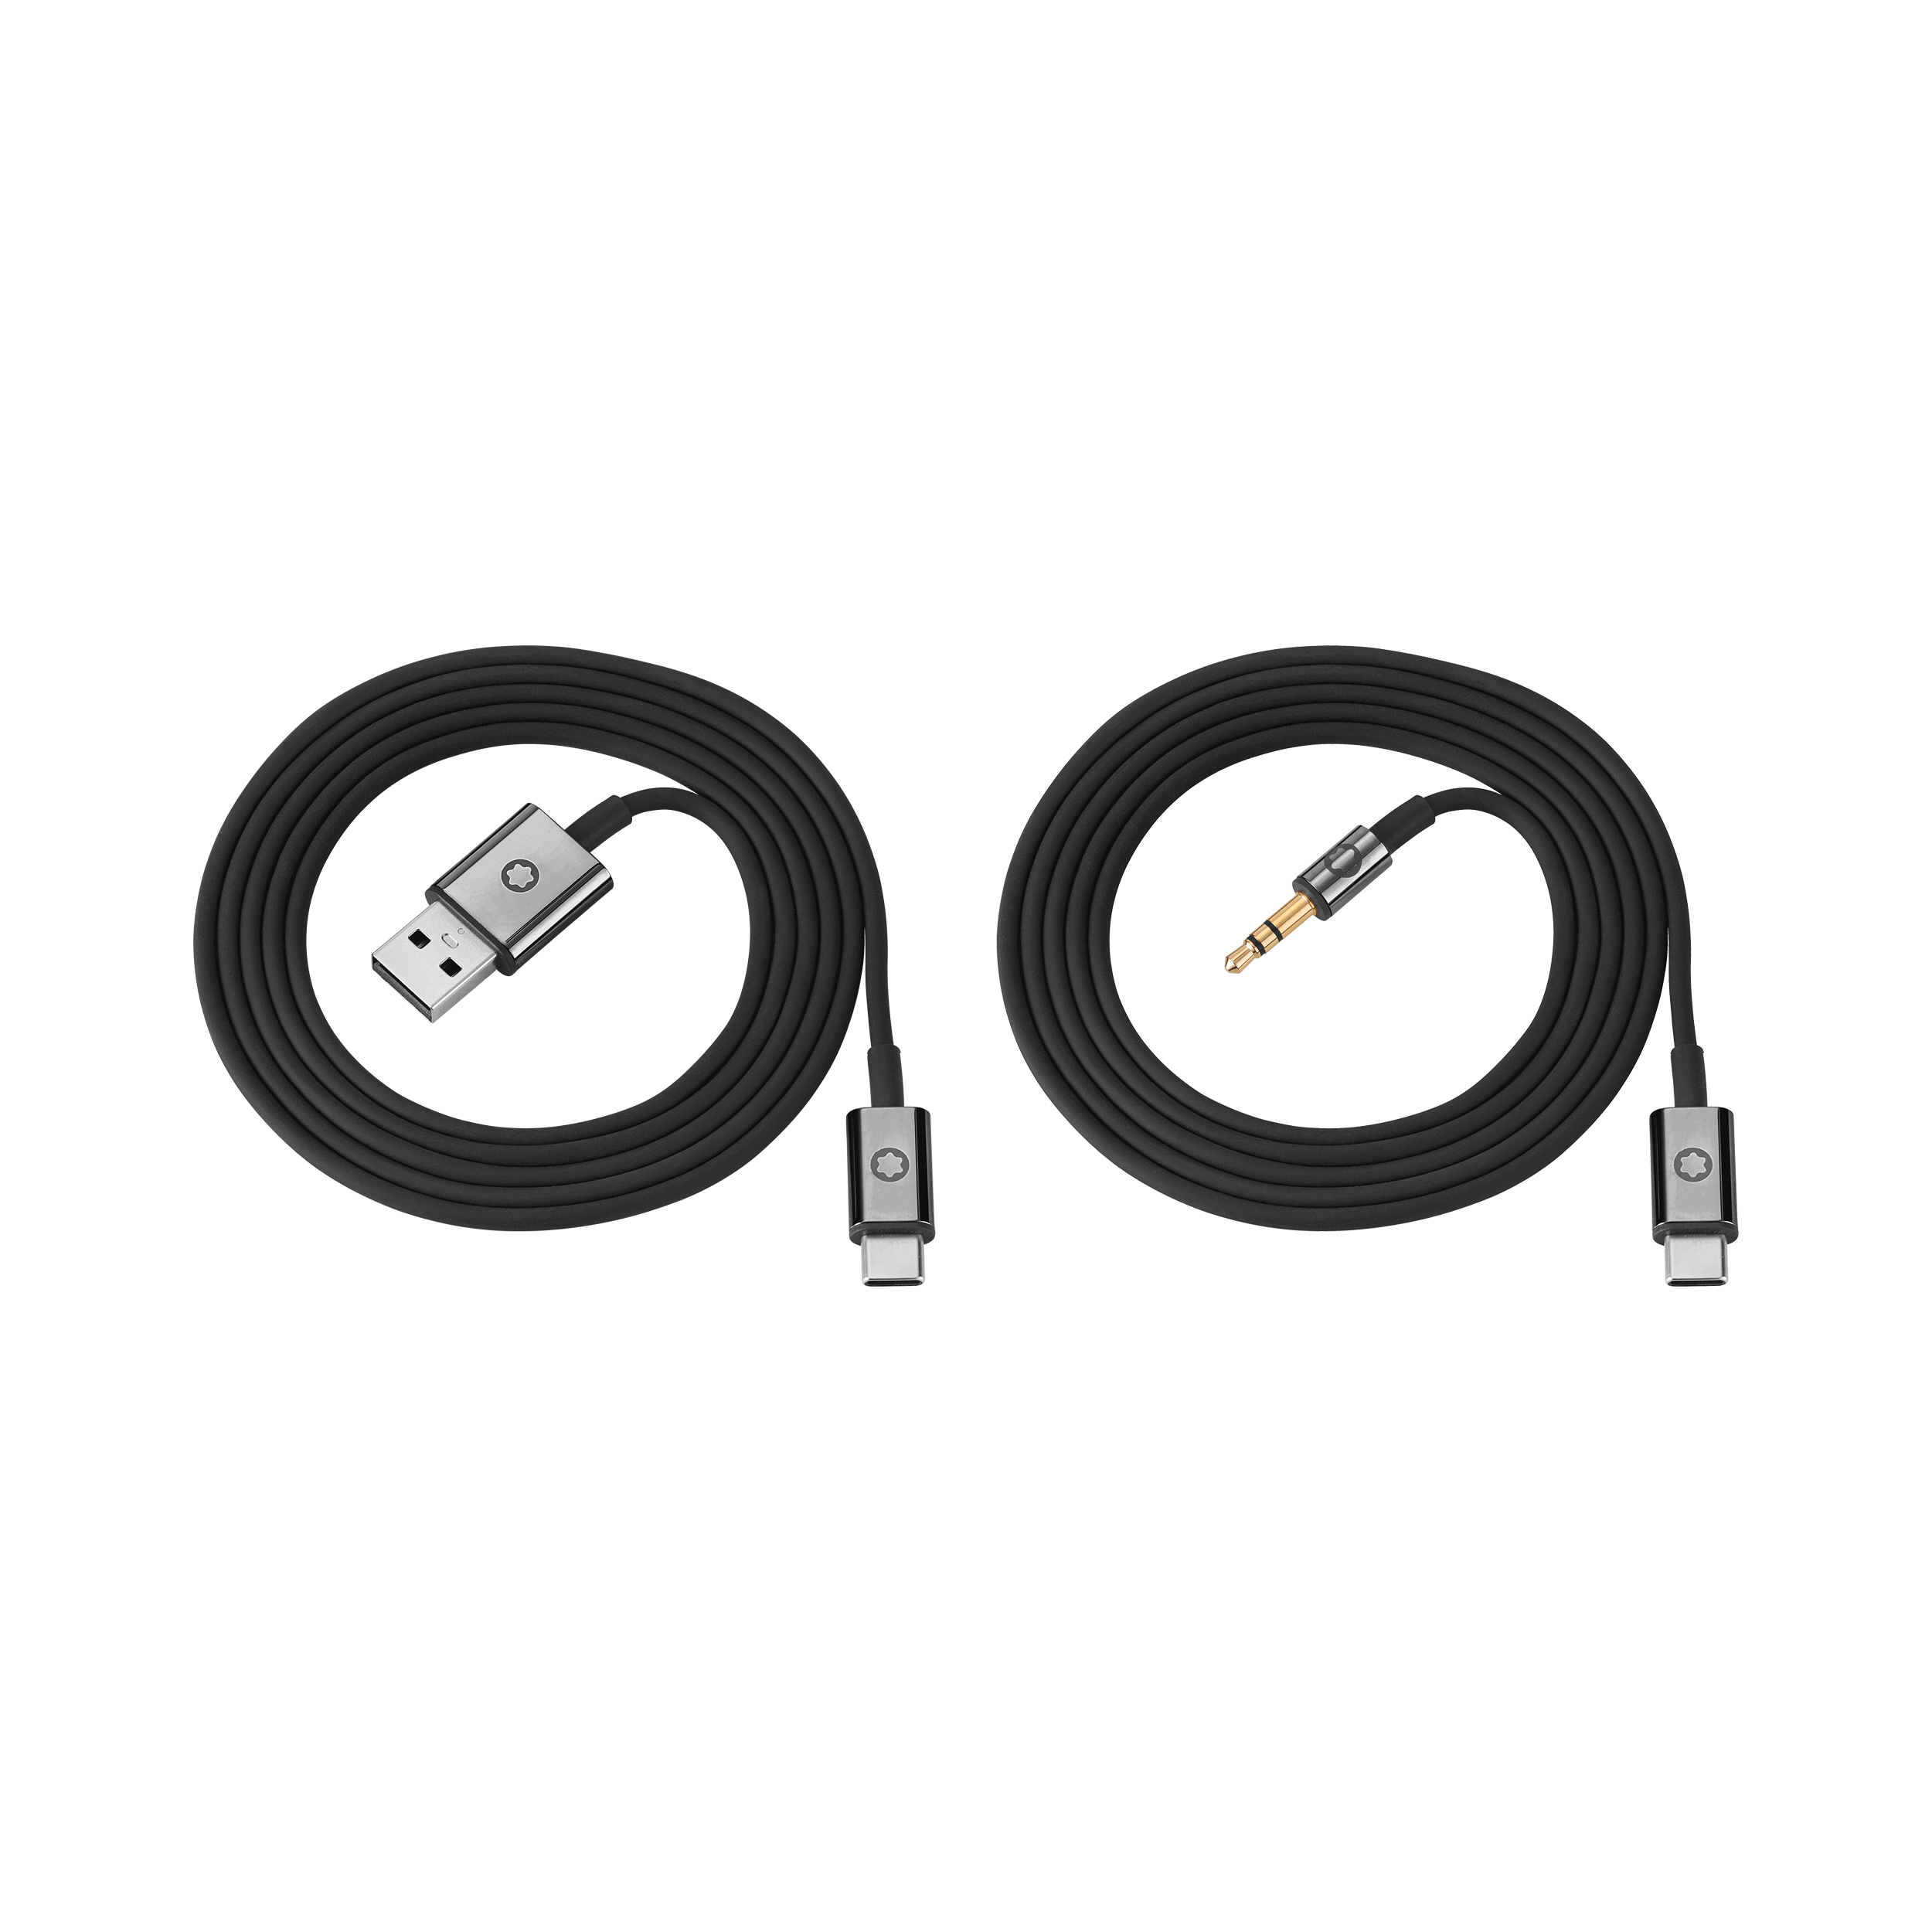 Black Cable Set for Montblanc MB 01 Headphones